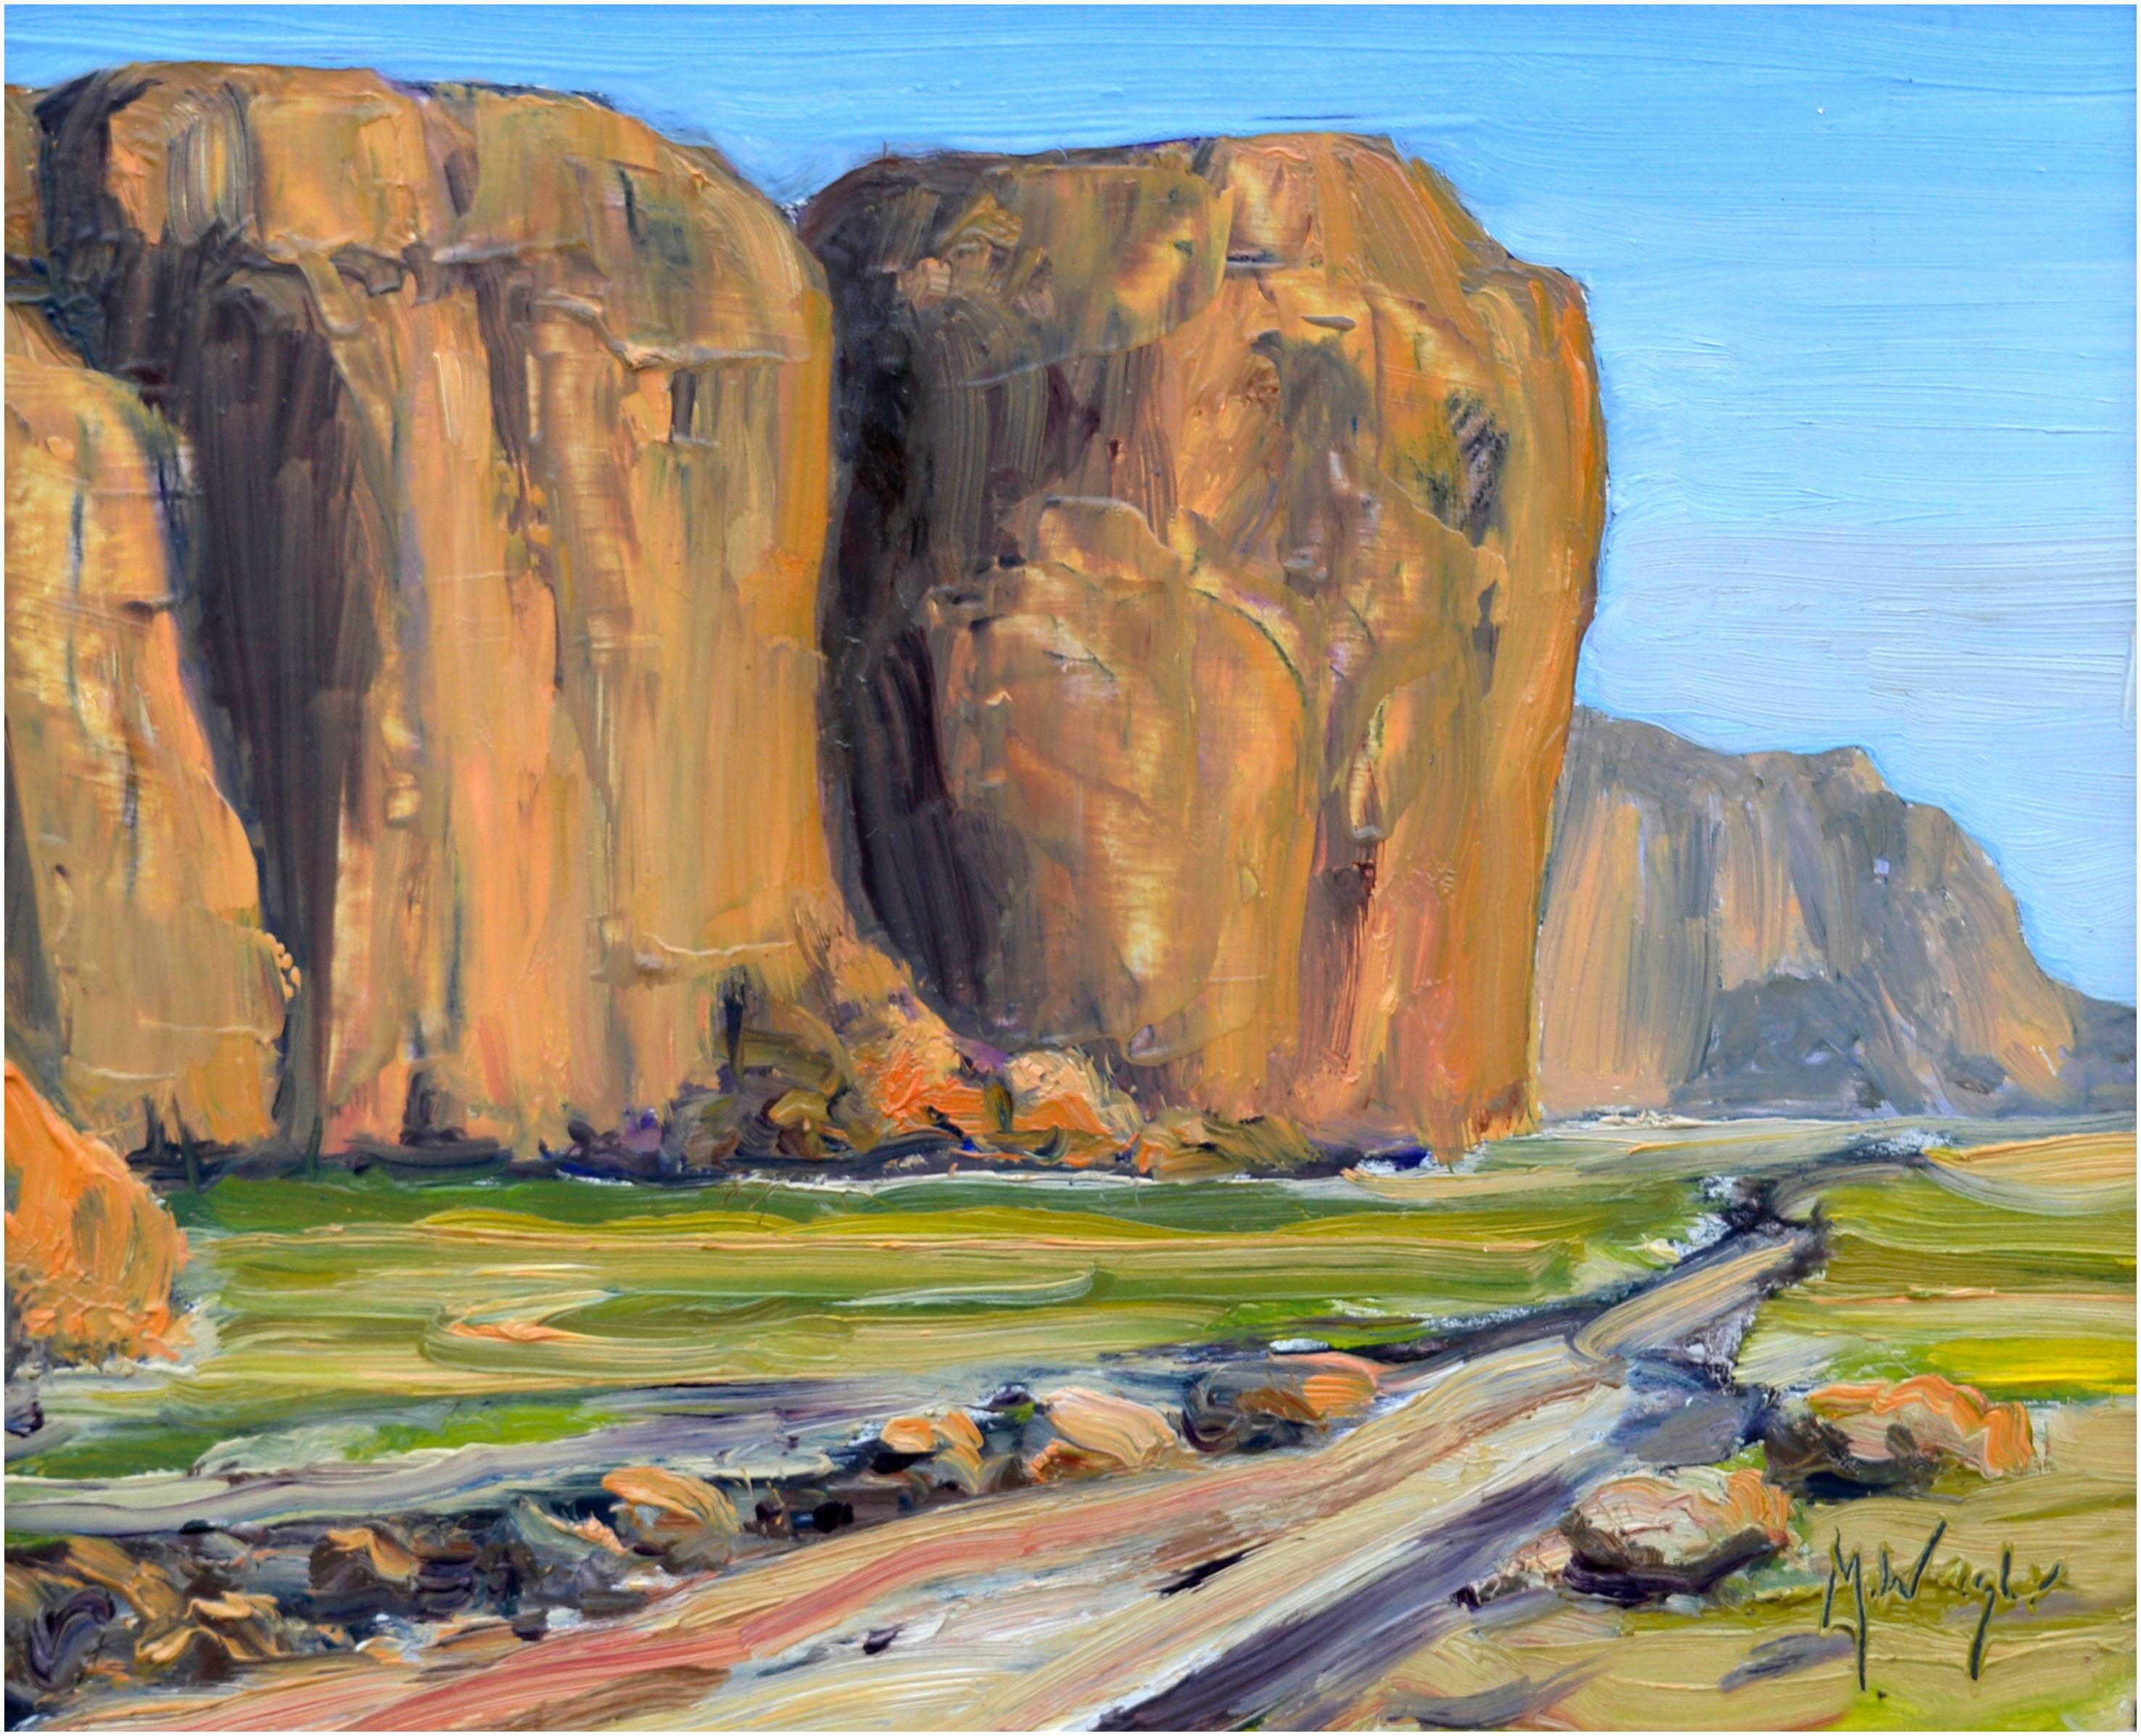 Monument Valley, Utah Desert Oil Paint Landscape  - Painting by Mike Wright